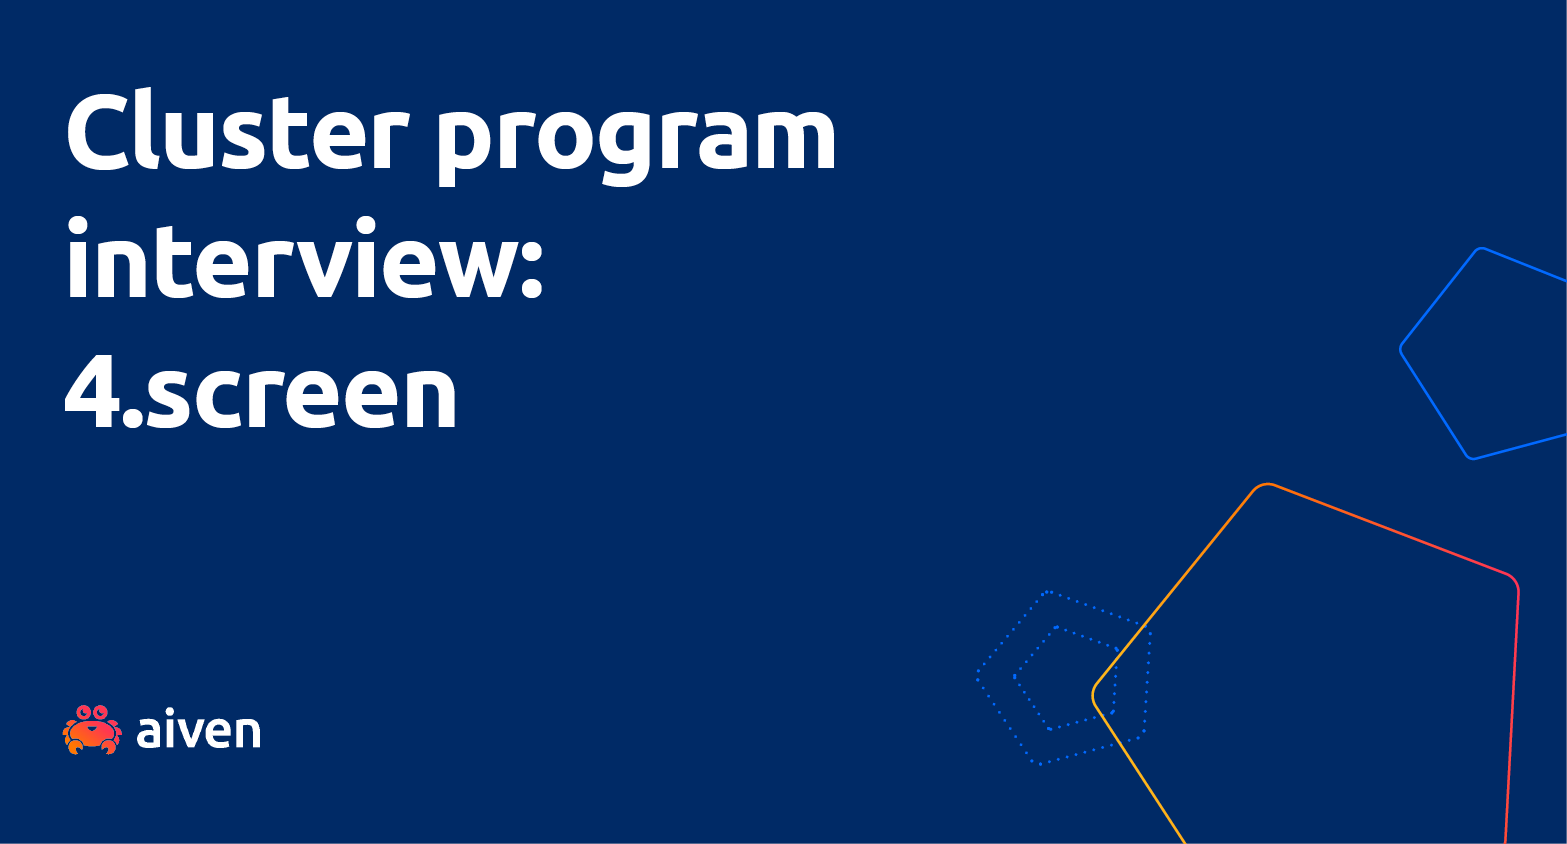 The words "Cluster program interview: 4.screen" against a blue background, with the AIven logo in the corner